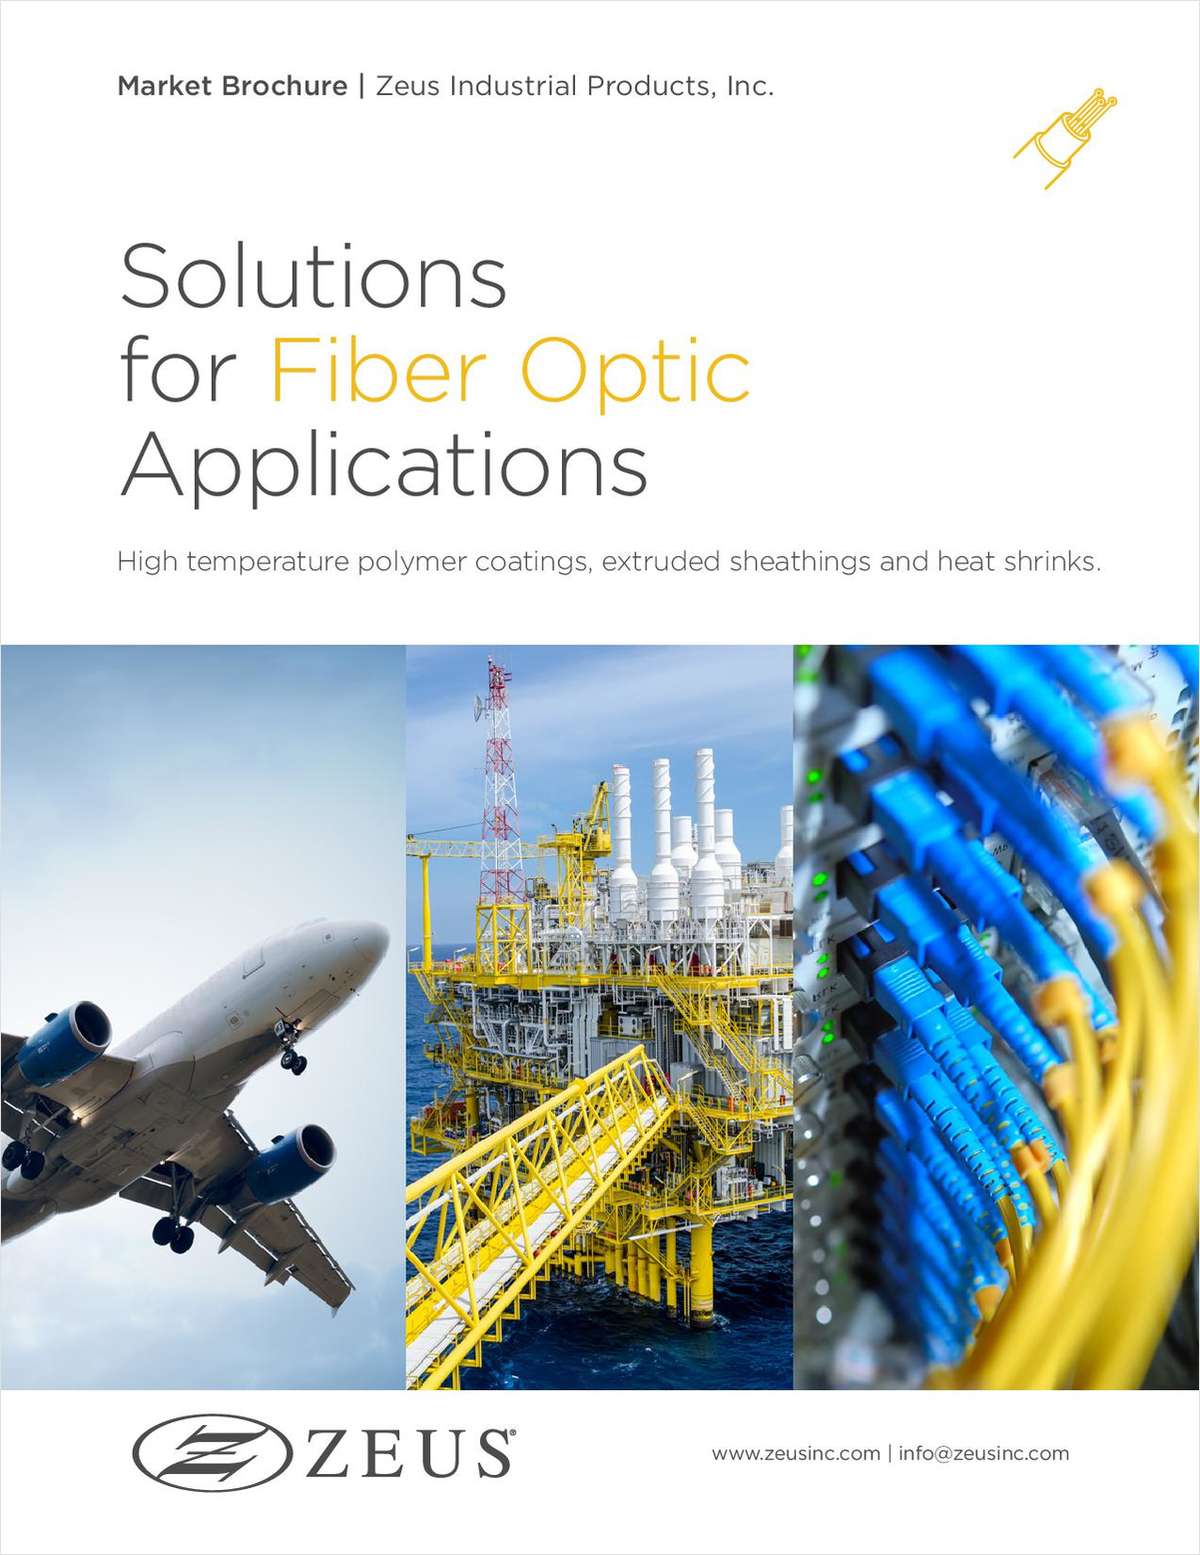 Custom solutions for Fiber Optic performance: High temperature polymer coating and sheathing products that protect and support the latest fiber optic technology.